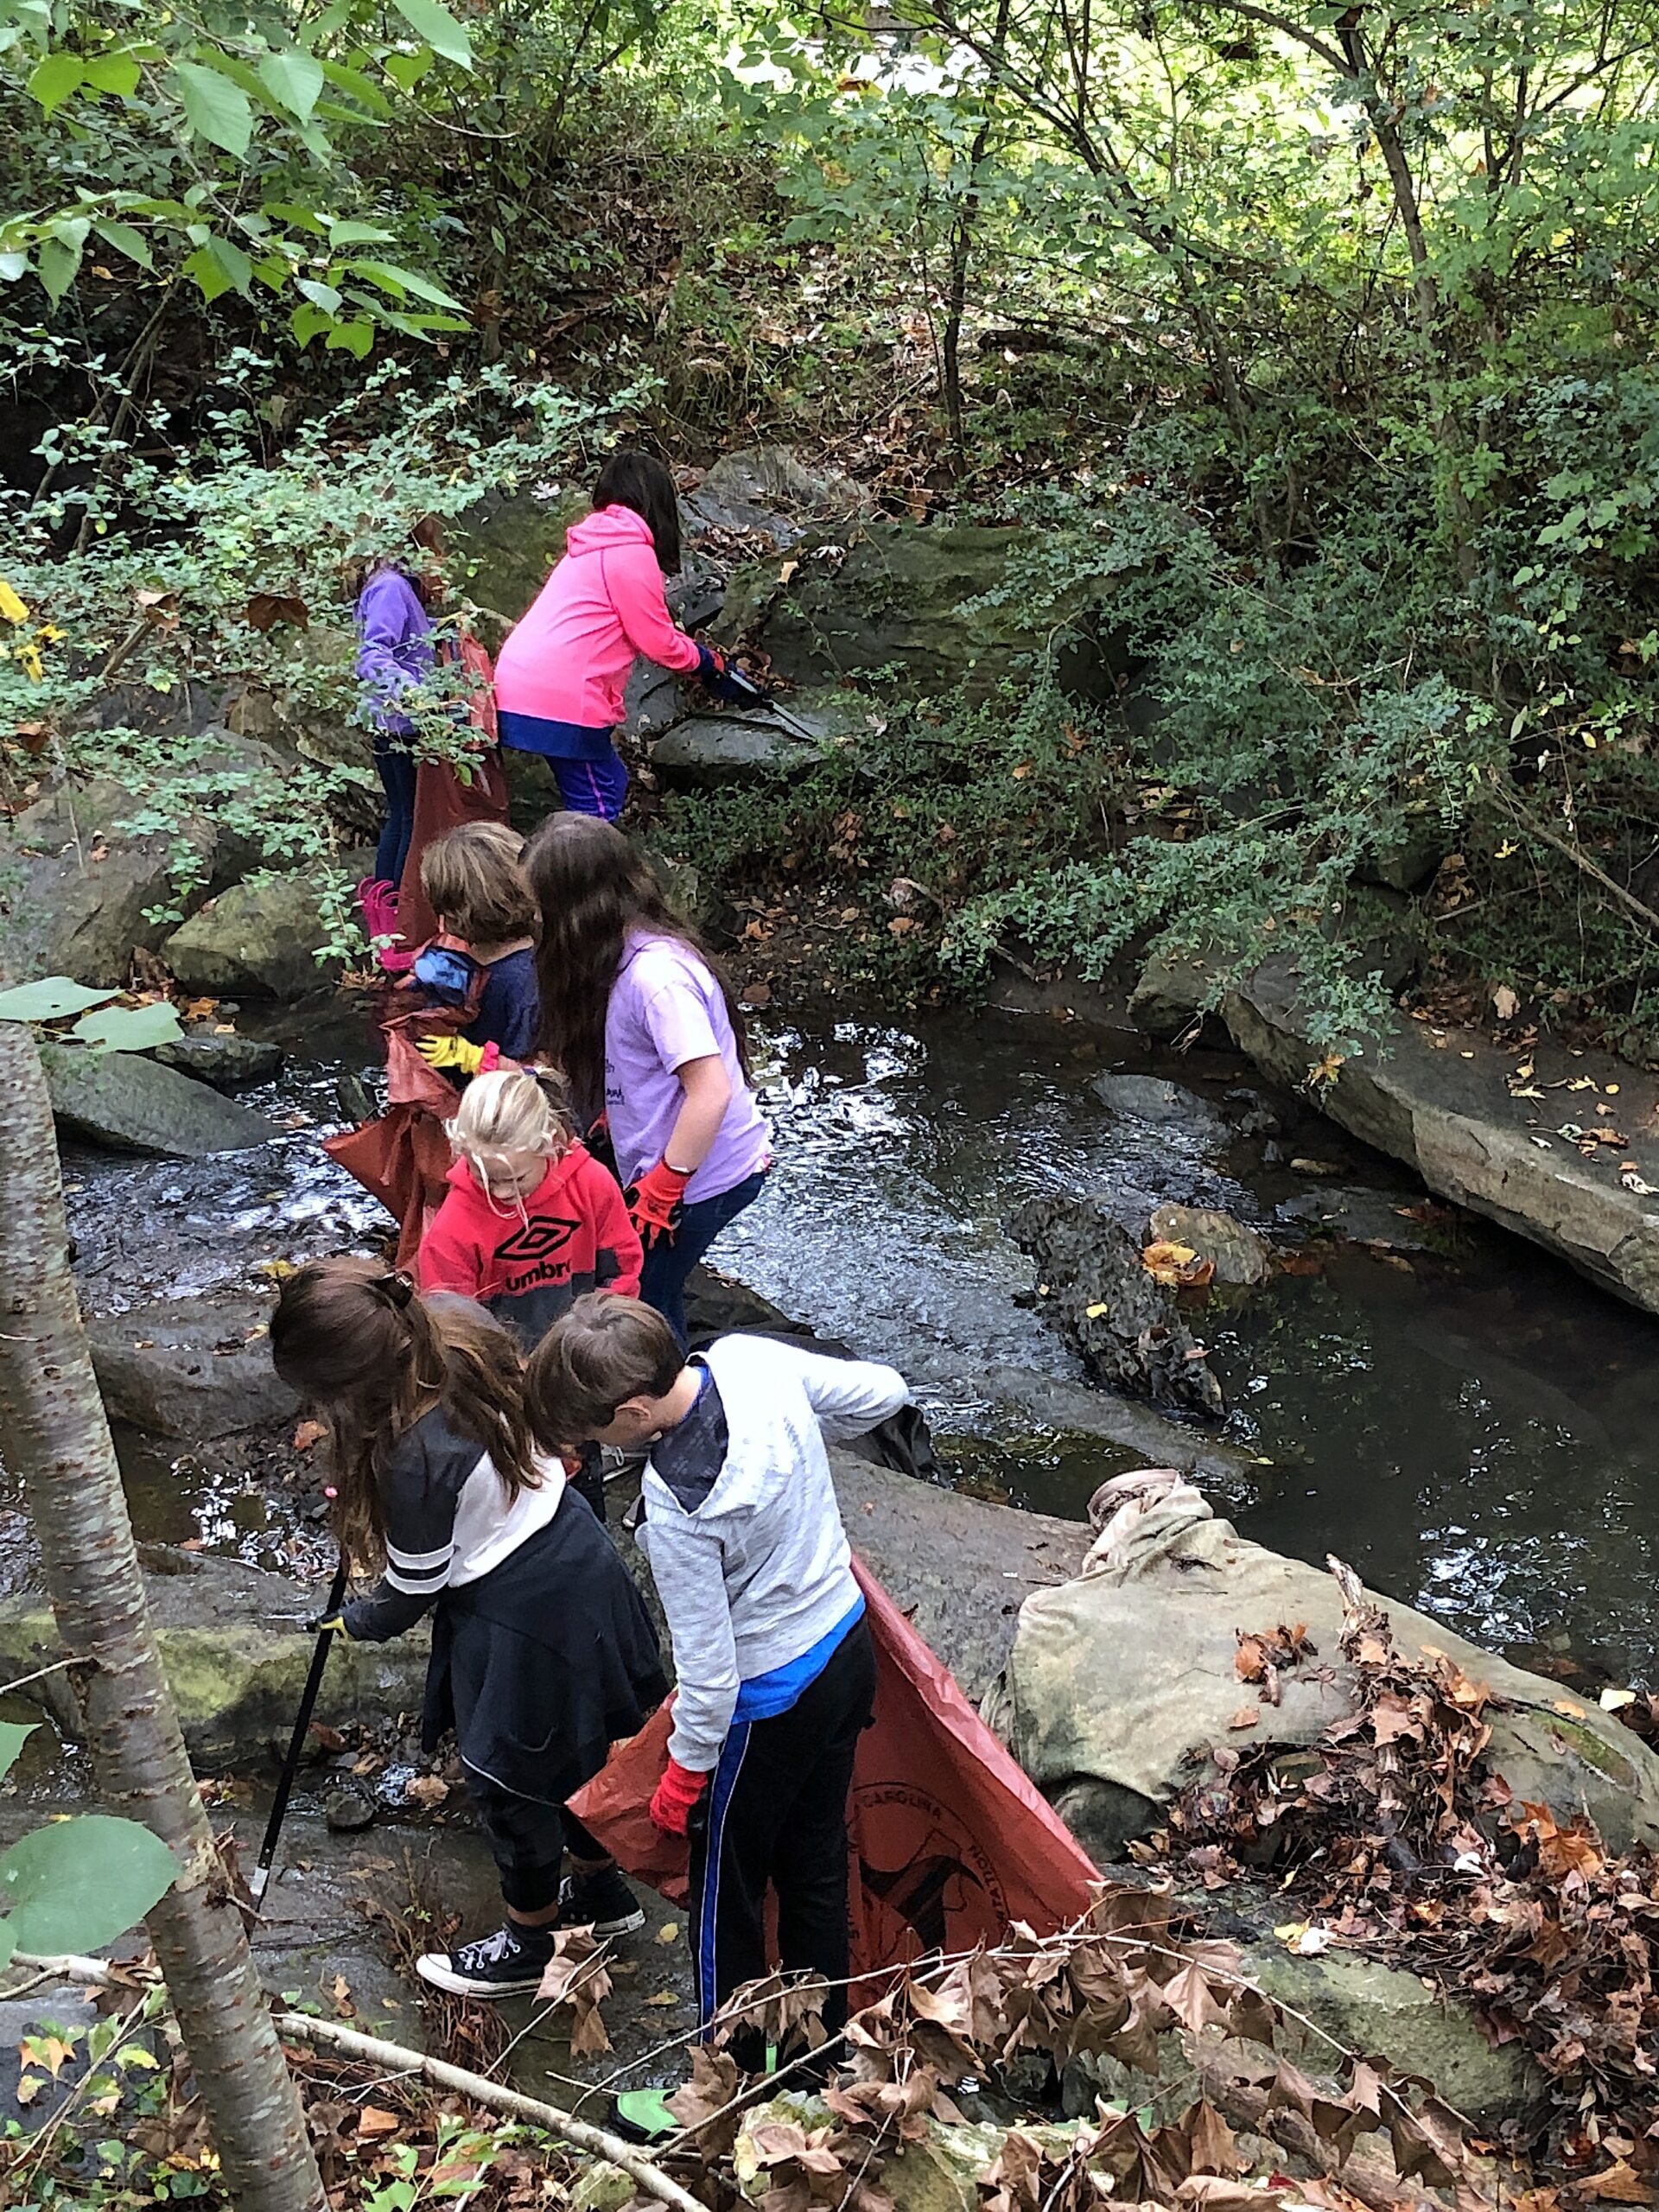 image: As students explore creek beds and waterways and participate in similar projects, they gain valuable experience and often become invested in the environment. Credit: Jenna Hartley.